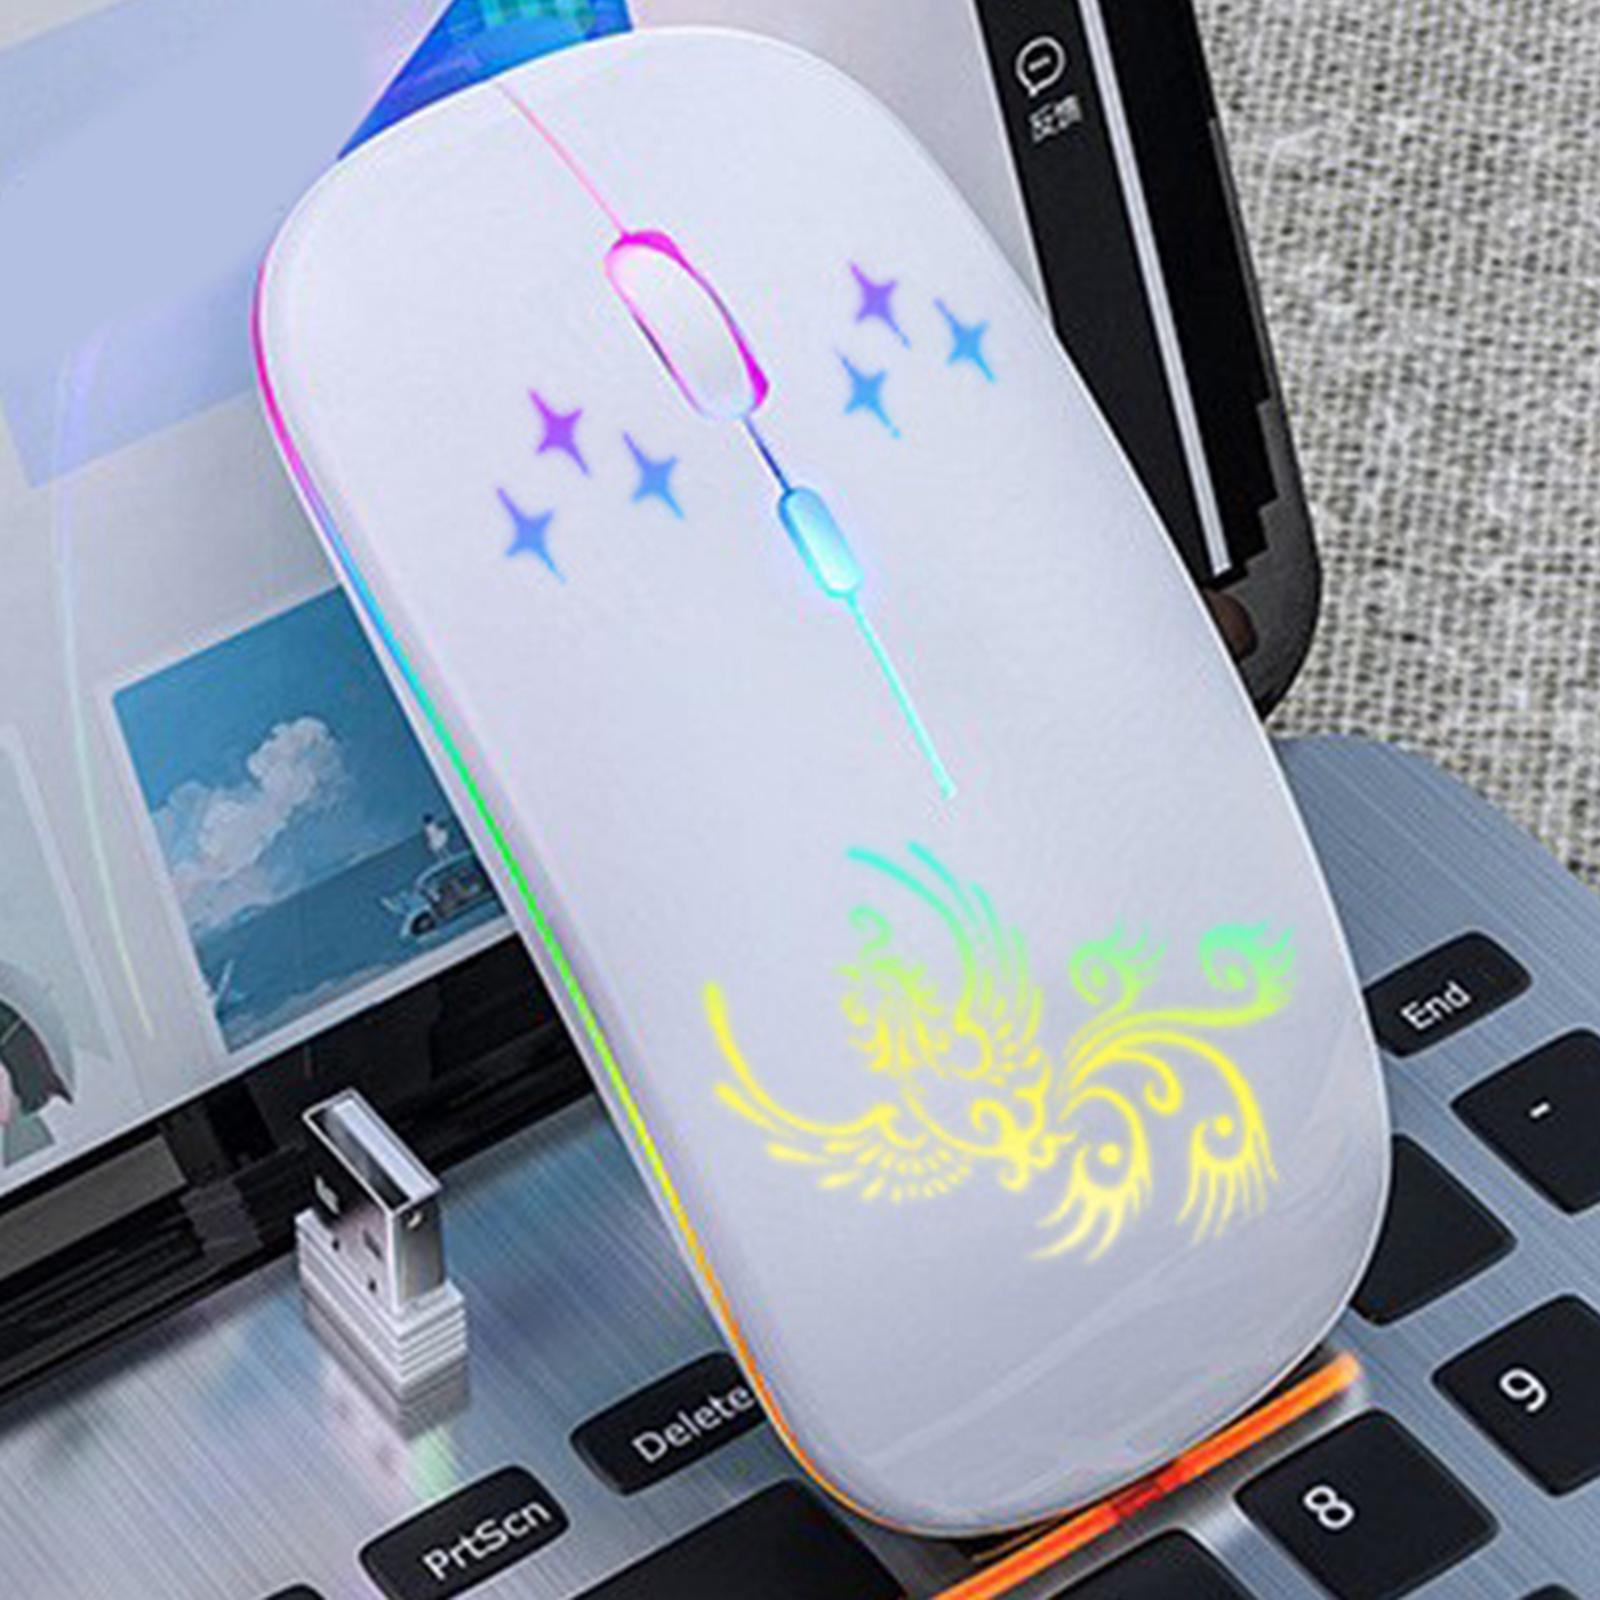 Wireless Mouse.0.2 2.4G Rechargeable for Laptop Notebook Desktop White